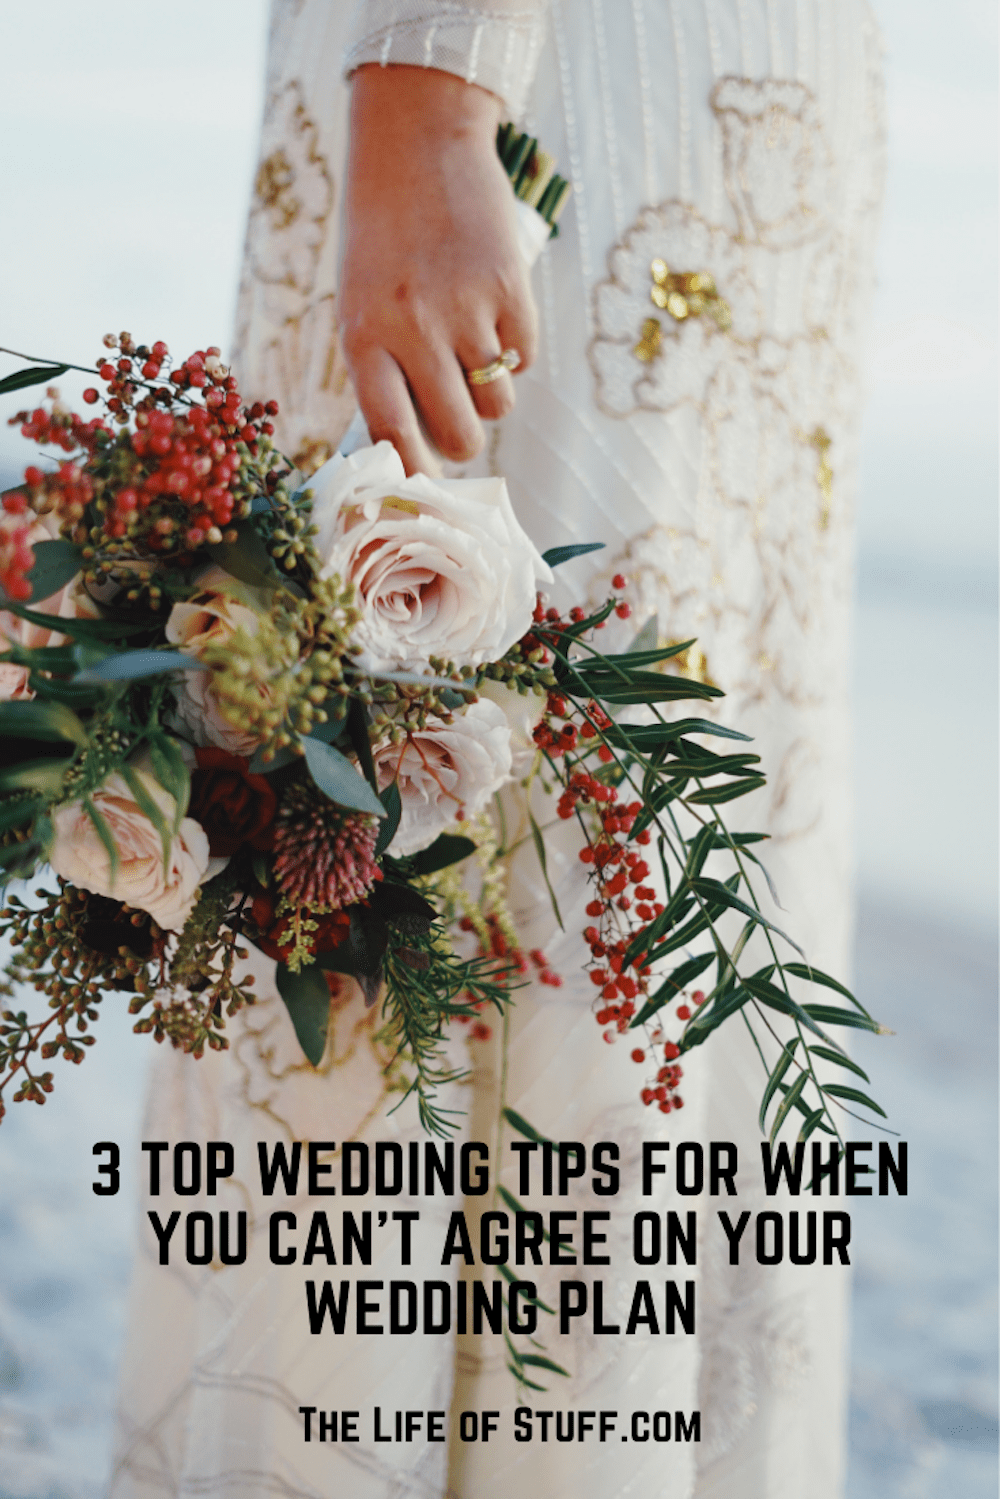 3 Top Wedding Tips for When You Can't Agree On Your Wedding Plan - The Life of Stuff